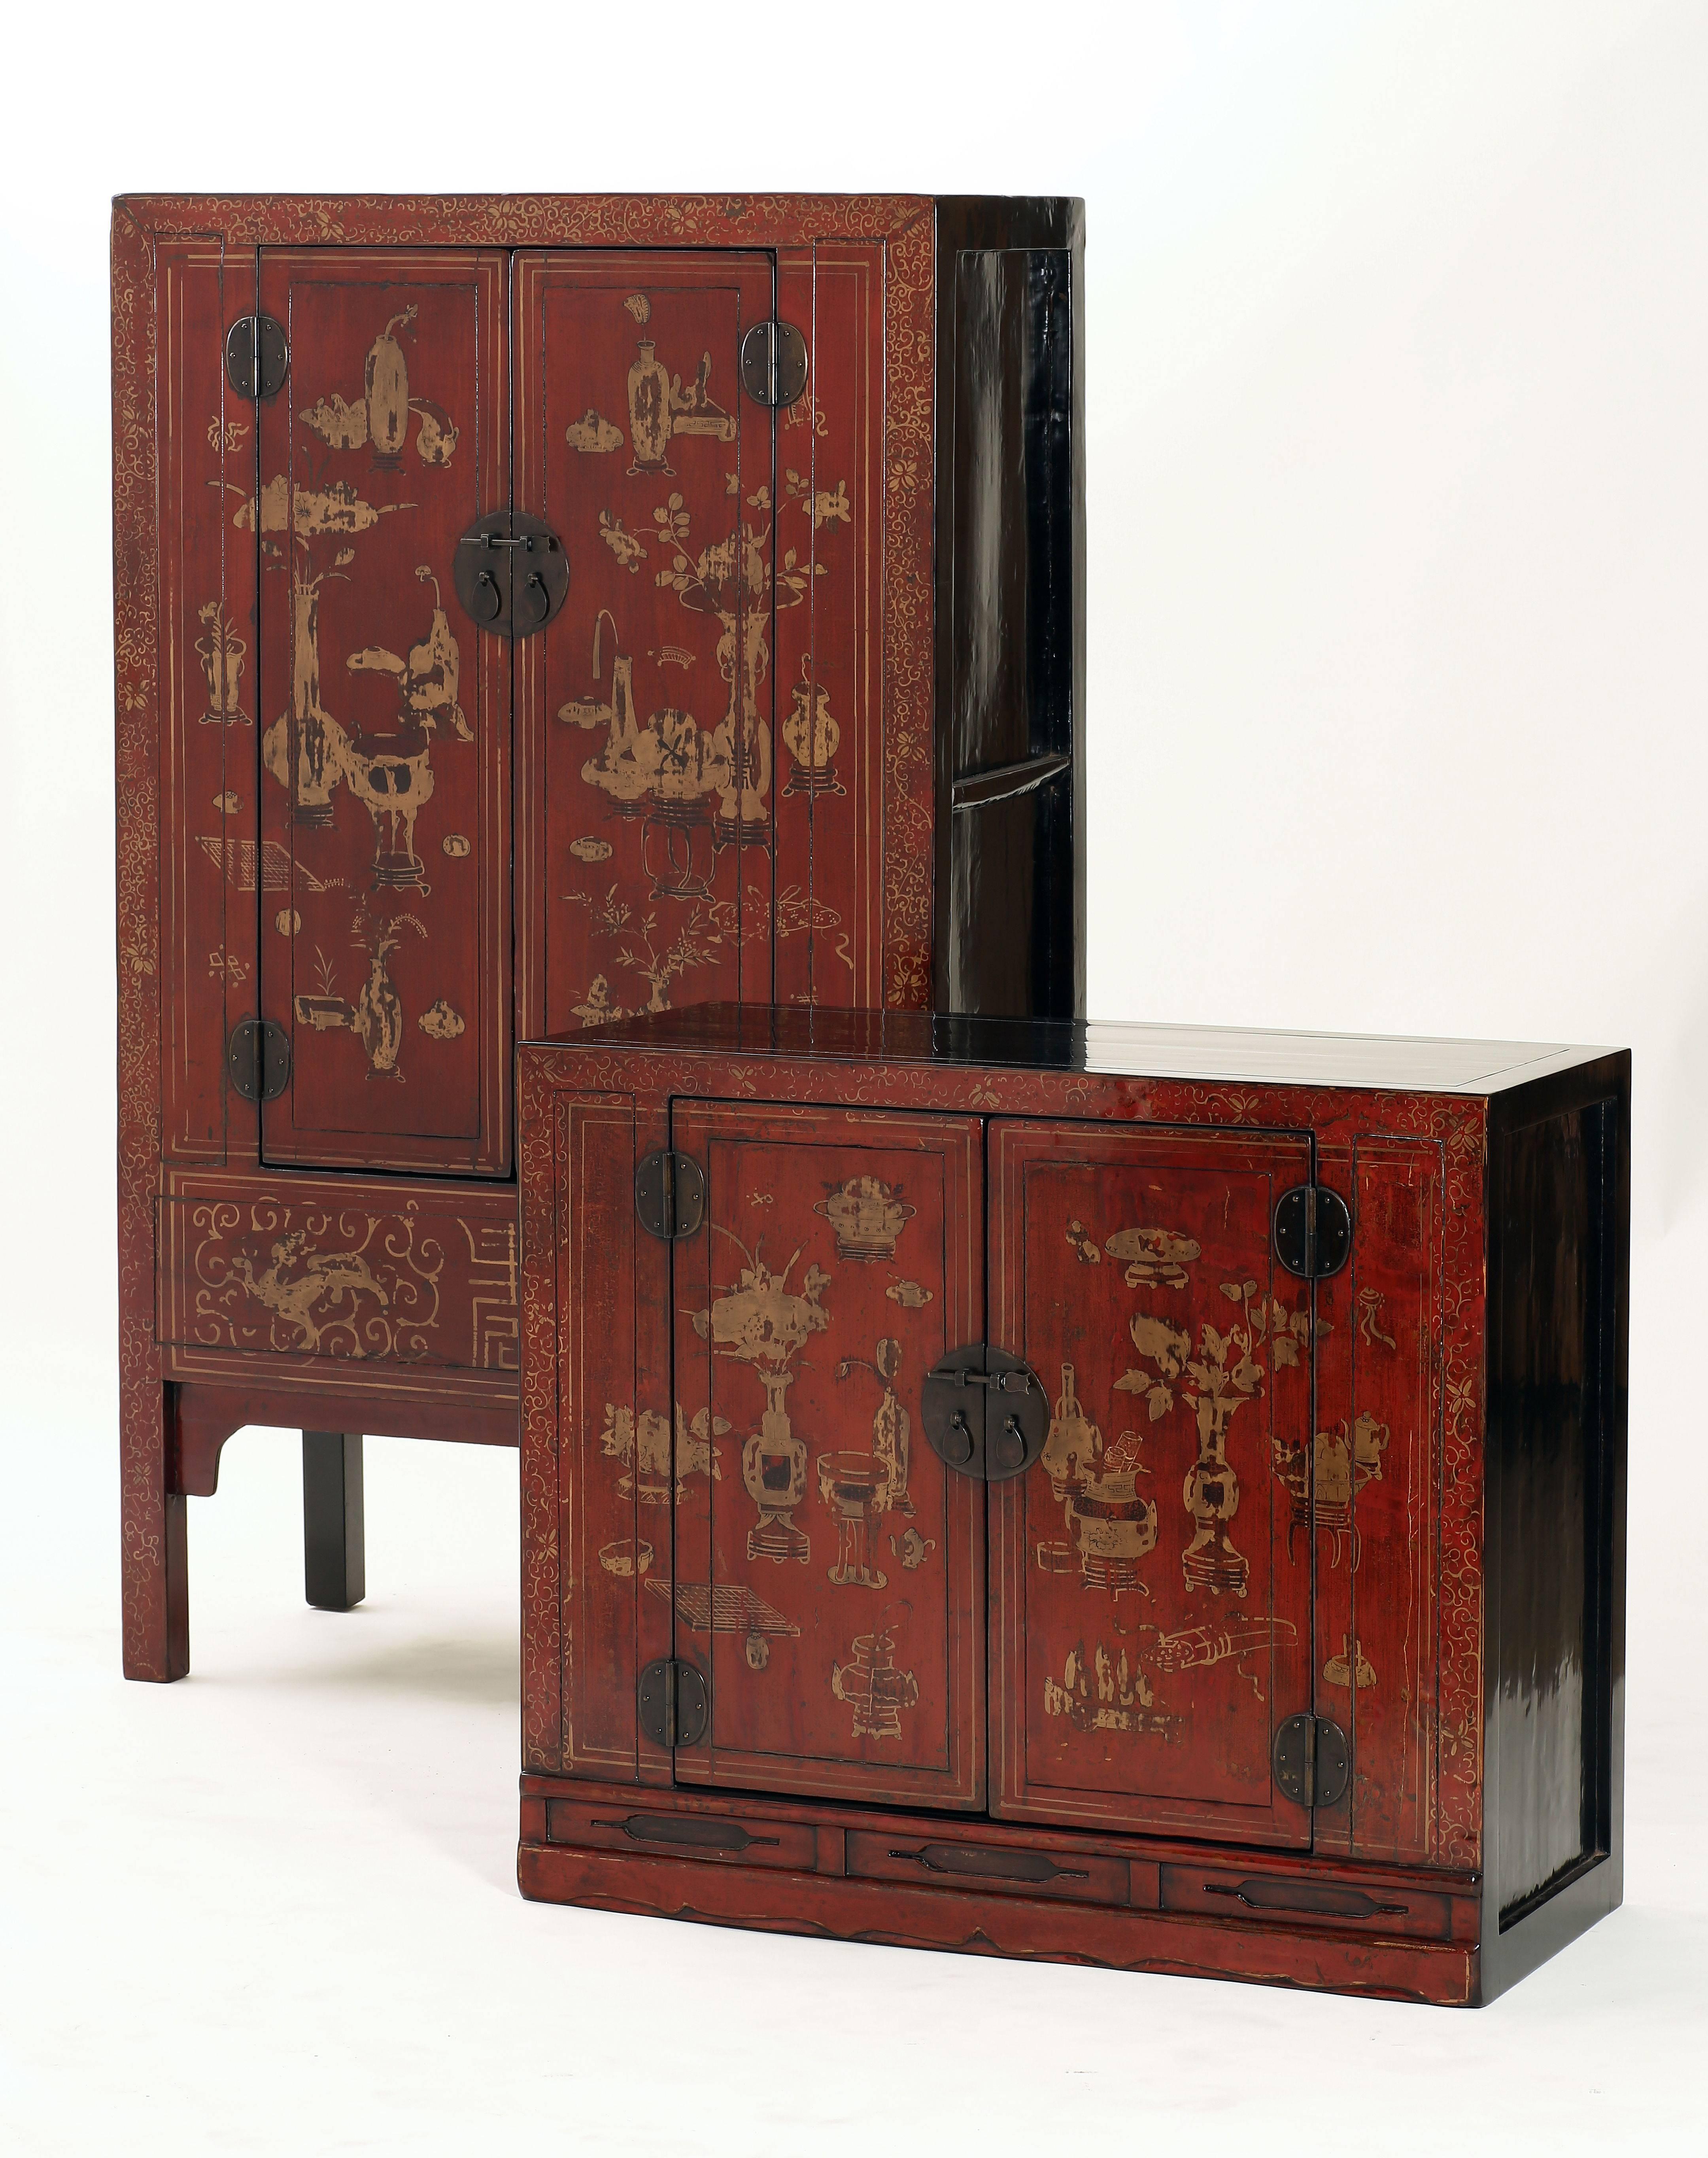 Of rectangular form, the cabinet consisting of two sections, the top section in the form of a book chest and the lower section square corner cabinet, each section with a pair of door panels hand-painted with flowers in vases and scholastic treasures